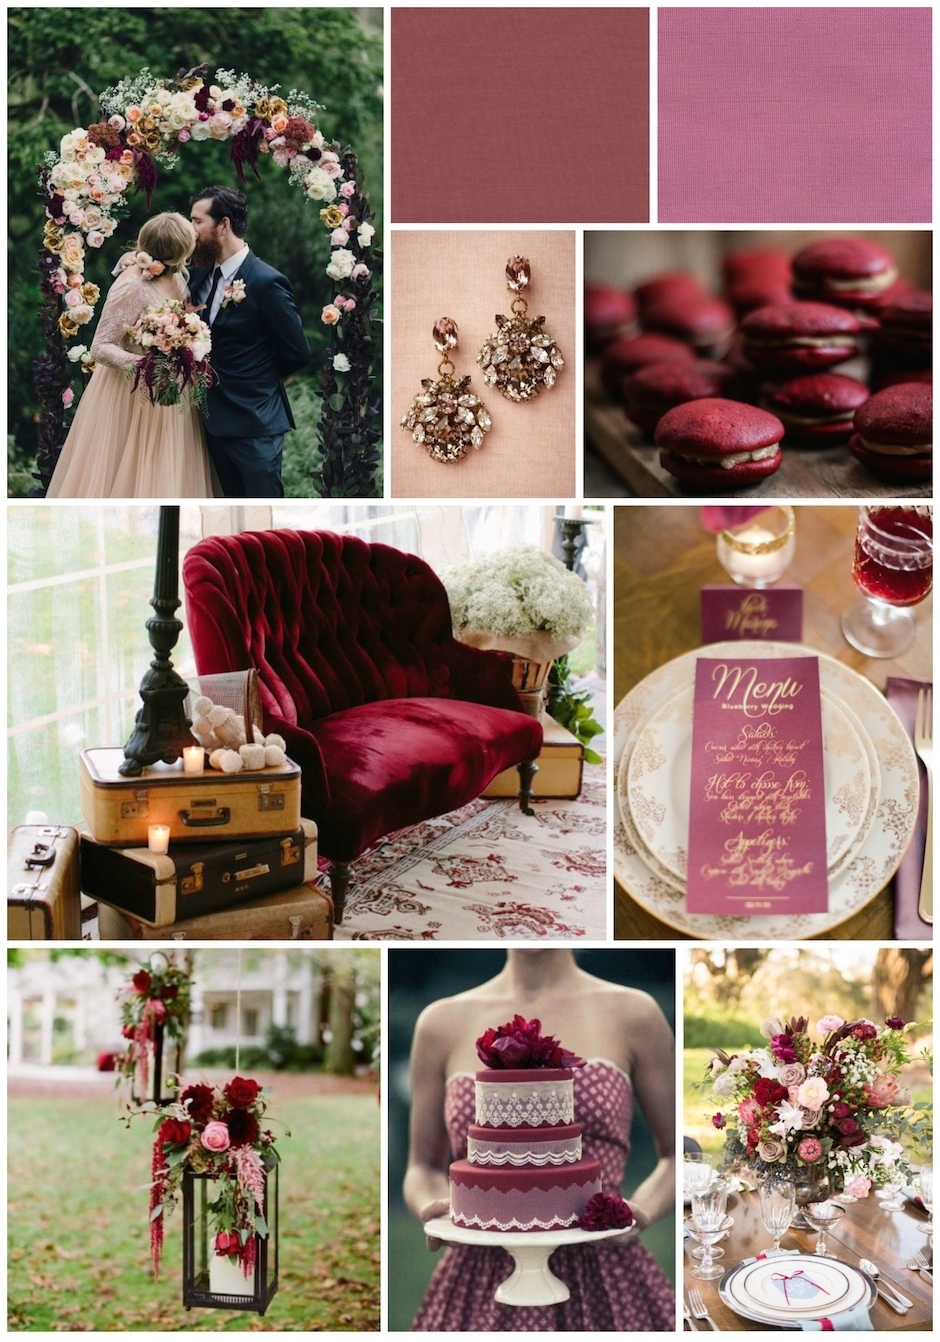 3 Gorgeous Wedding Palettes From Pantone's Fall 2015 Color Report ...